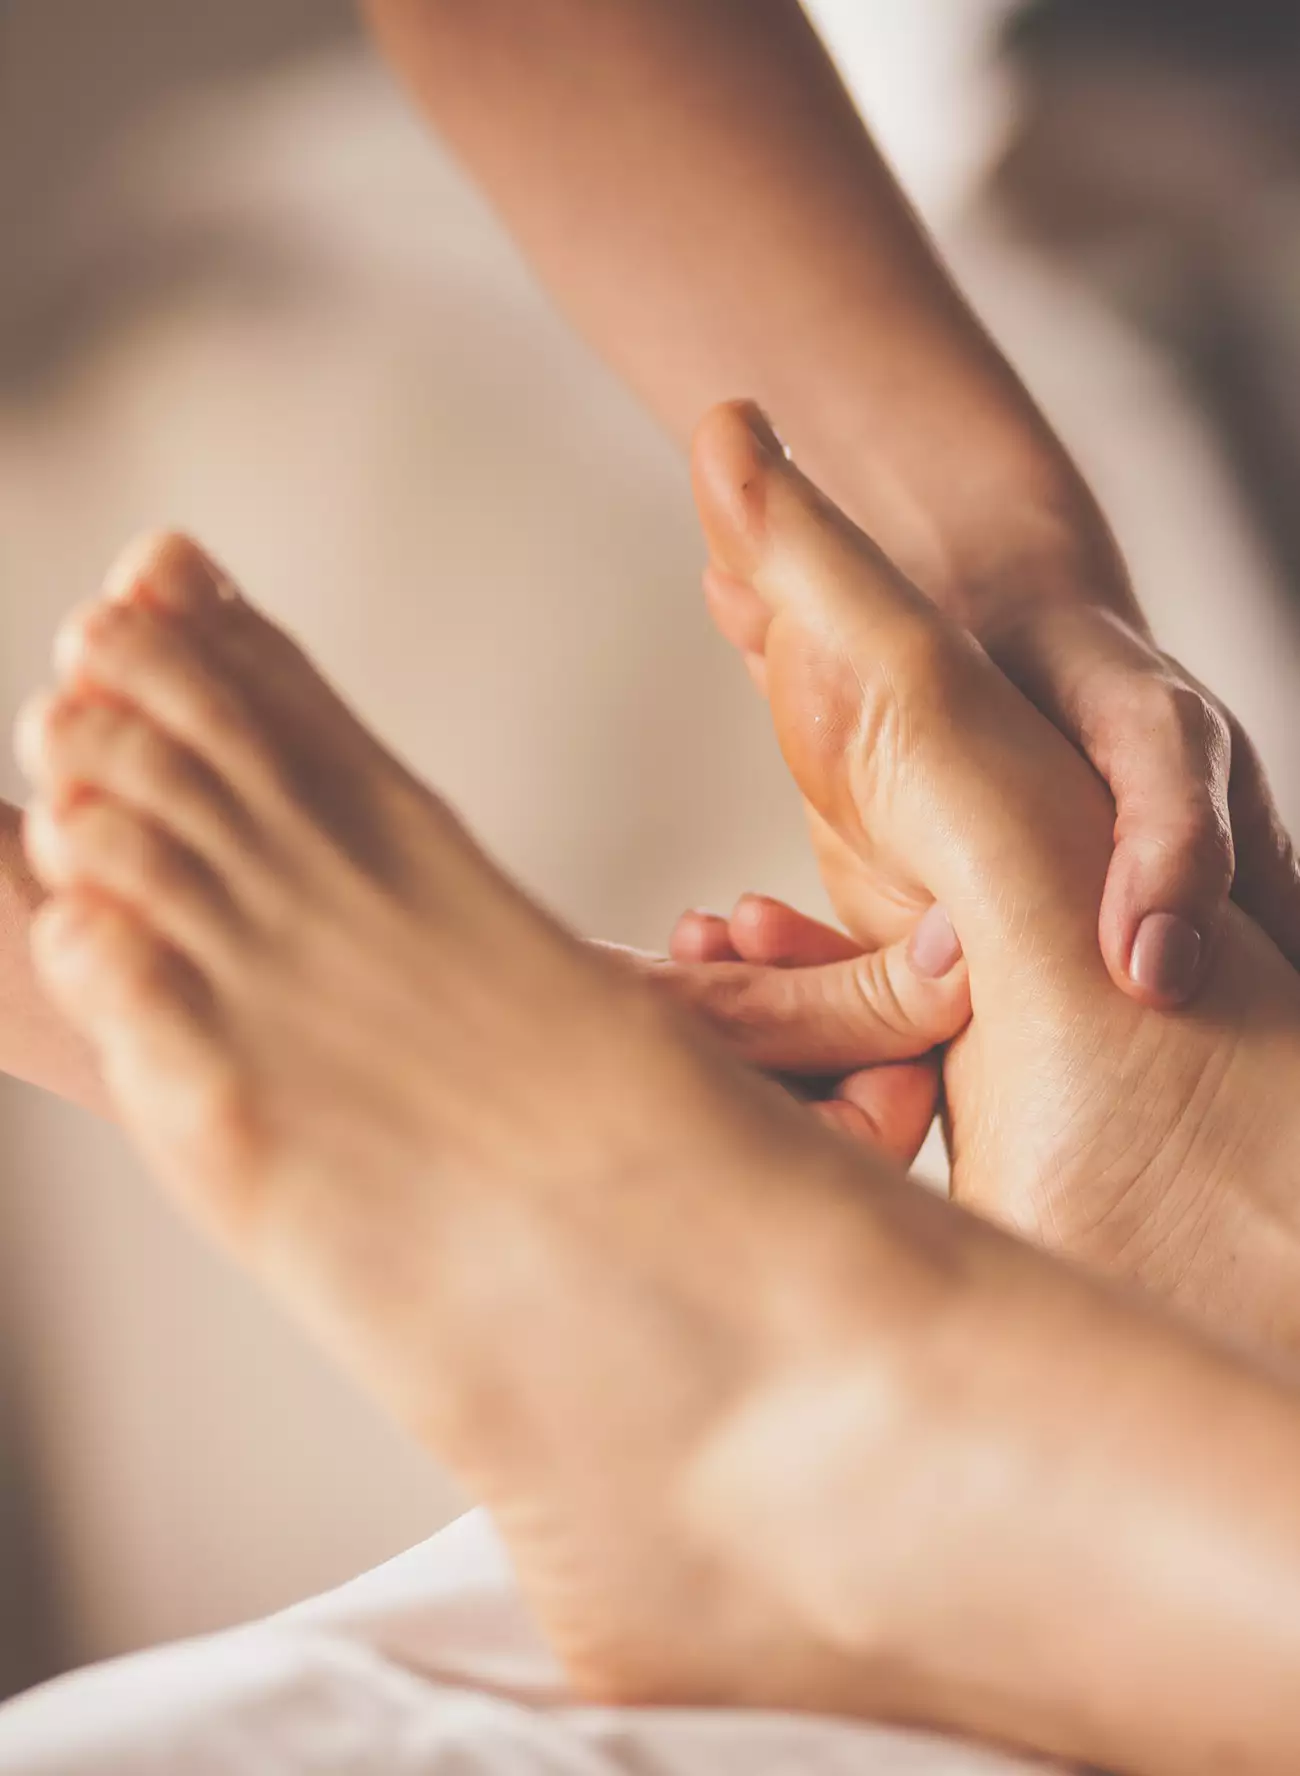 Thumb pressure on ball of foot during foot massage